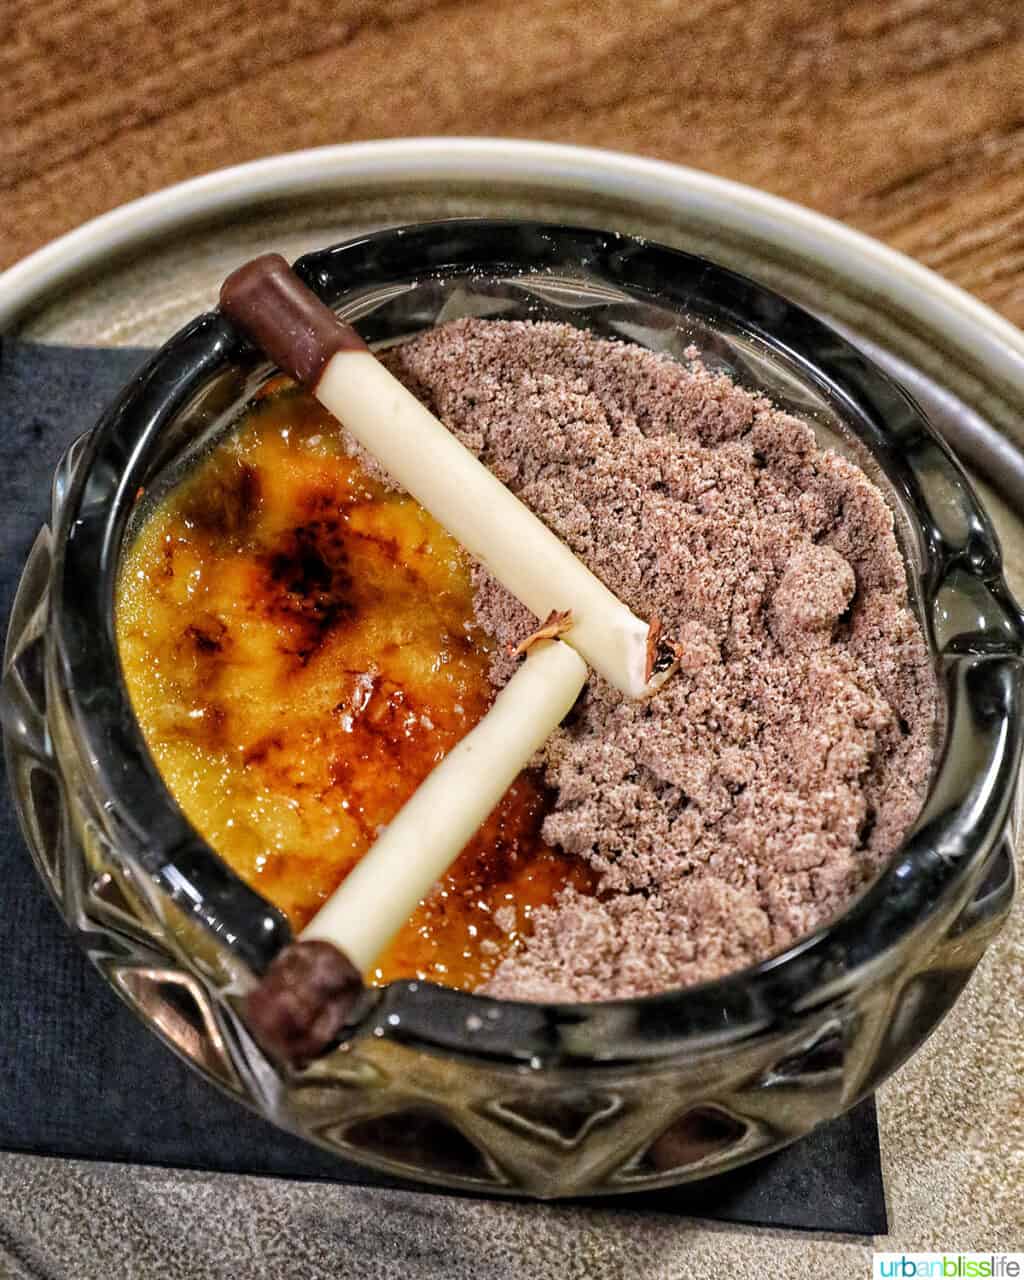 creme brulee made to look like an ash tray at Brazen Banff restaurant.